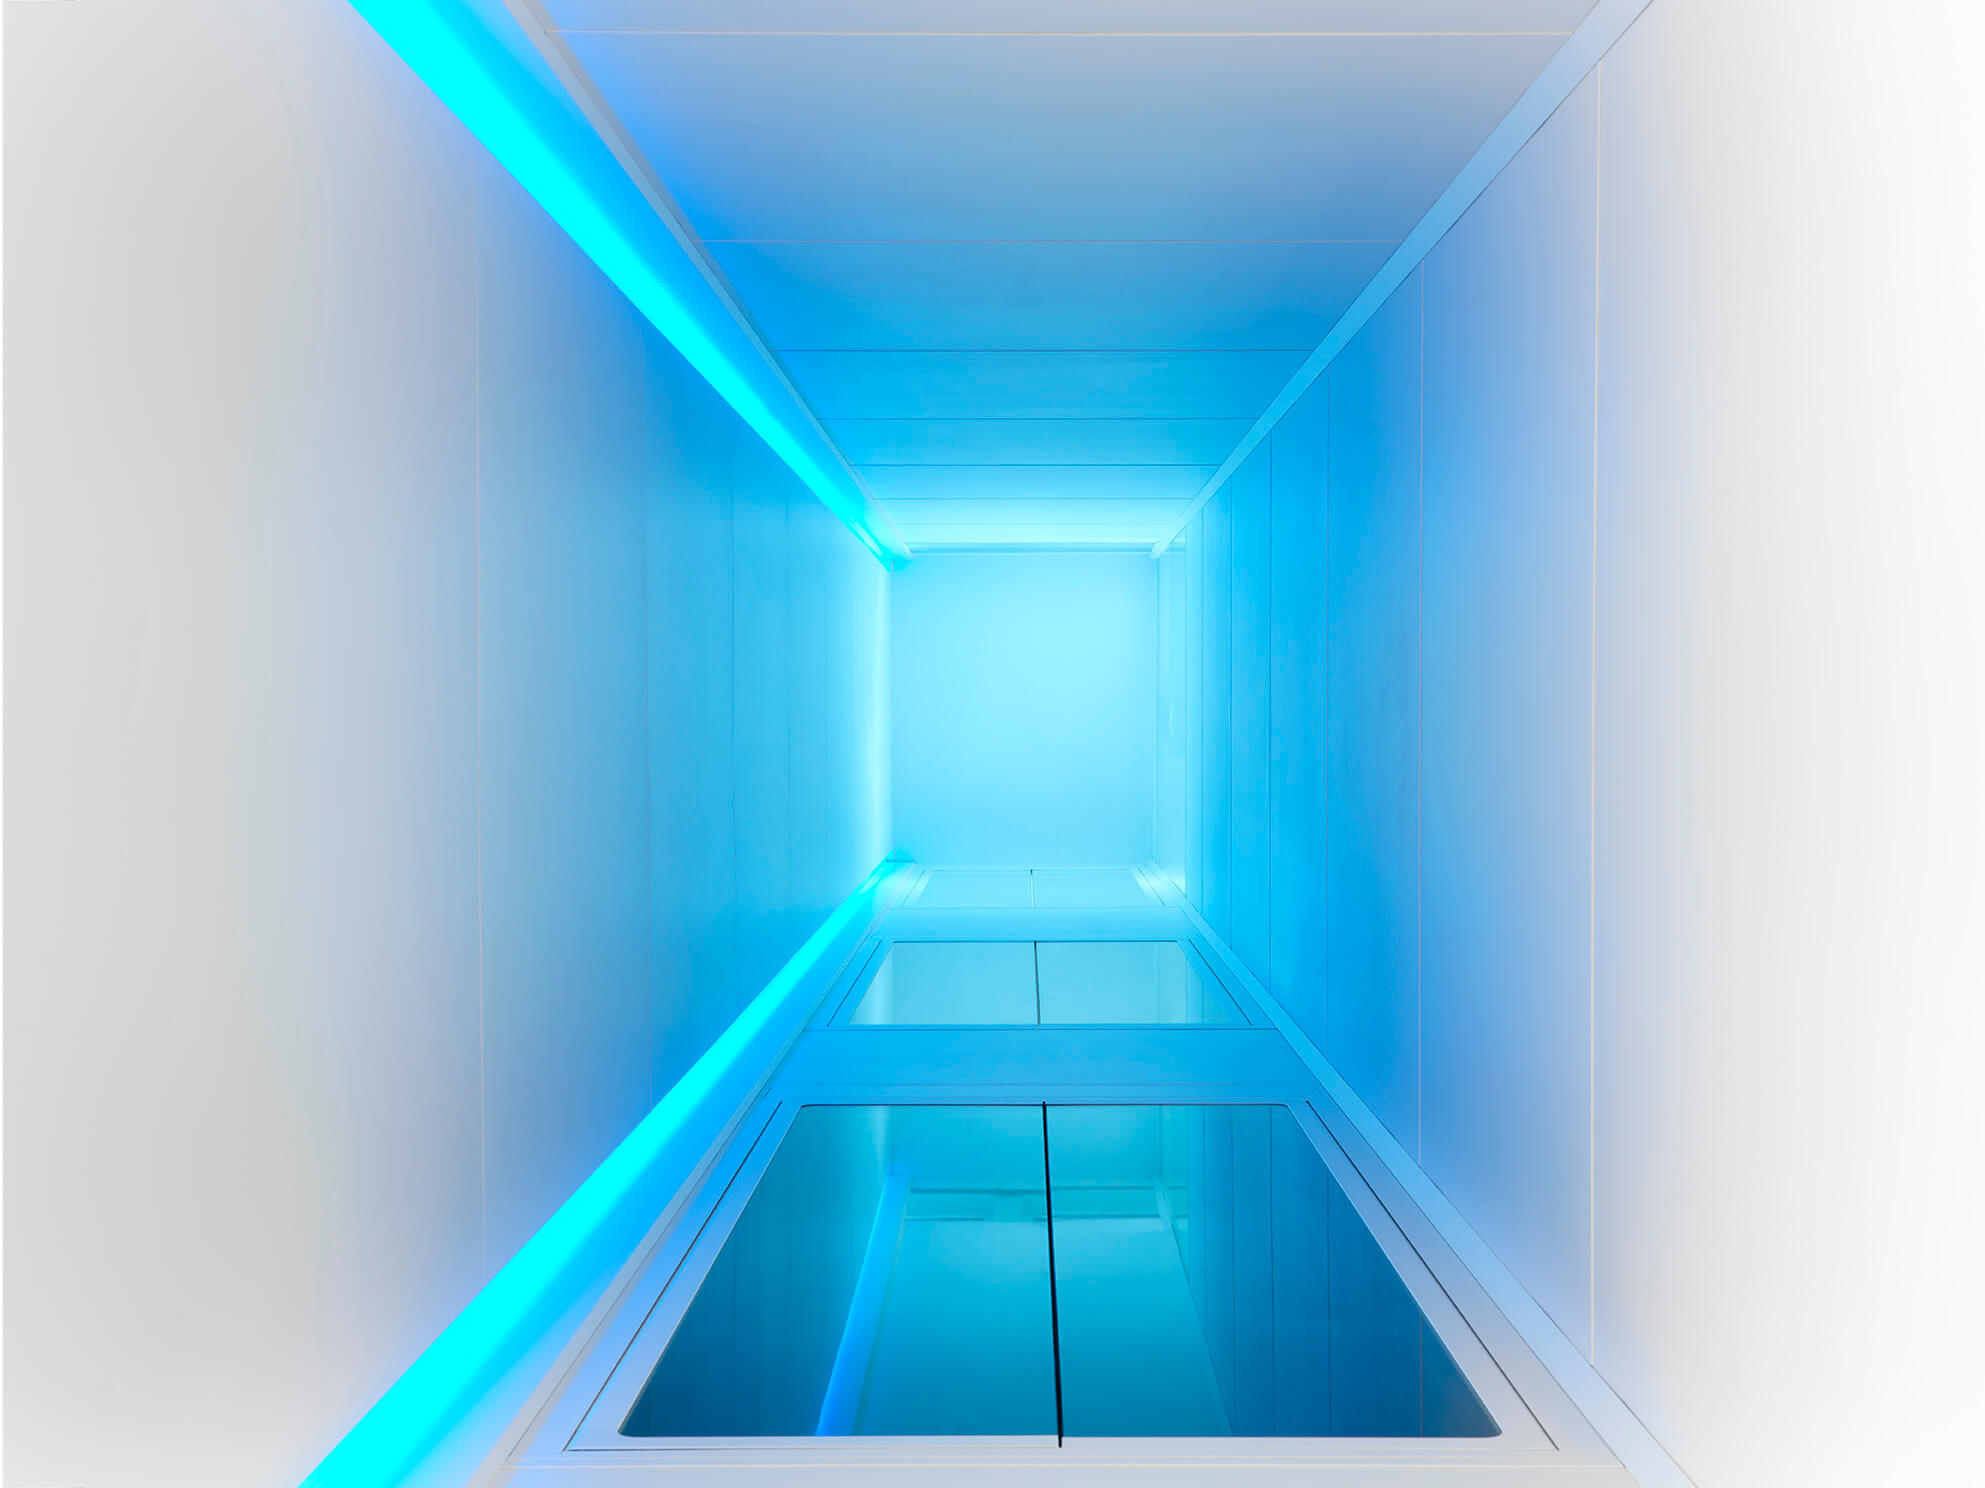 Have the elevator shaft light up in different colors and control it via the smat